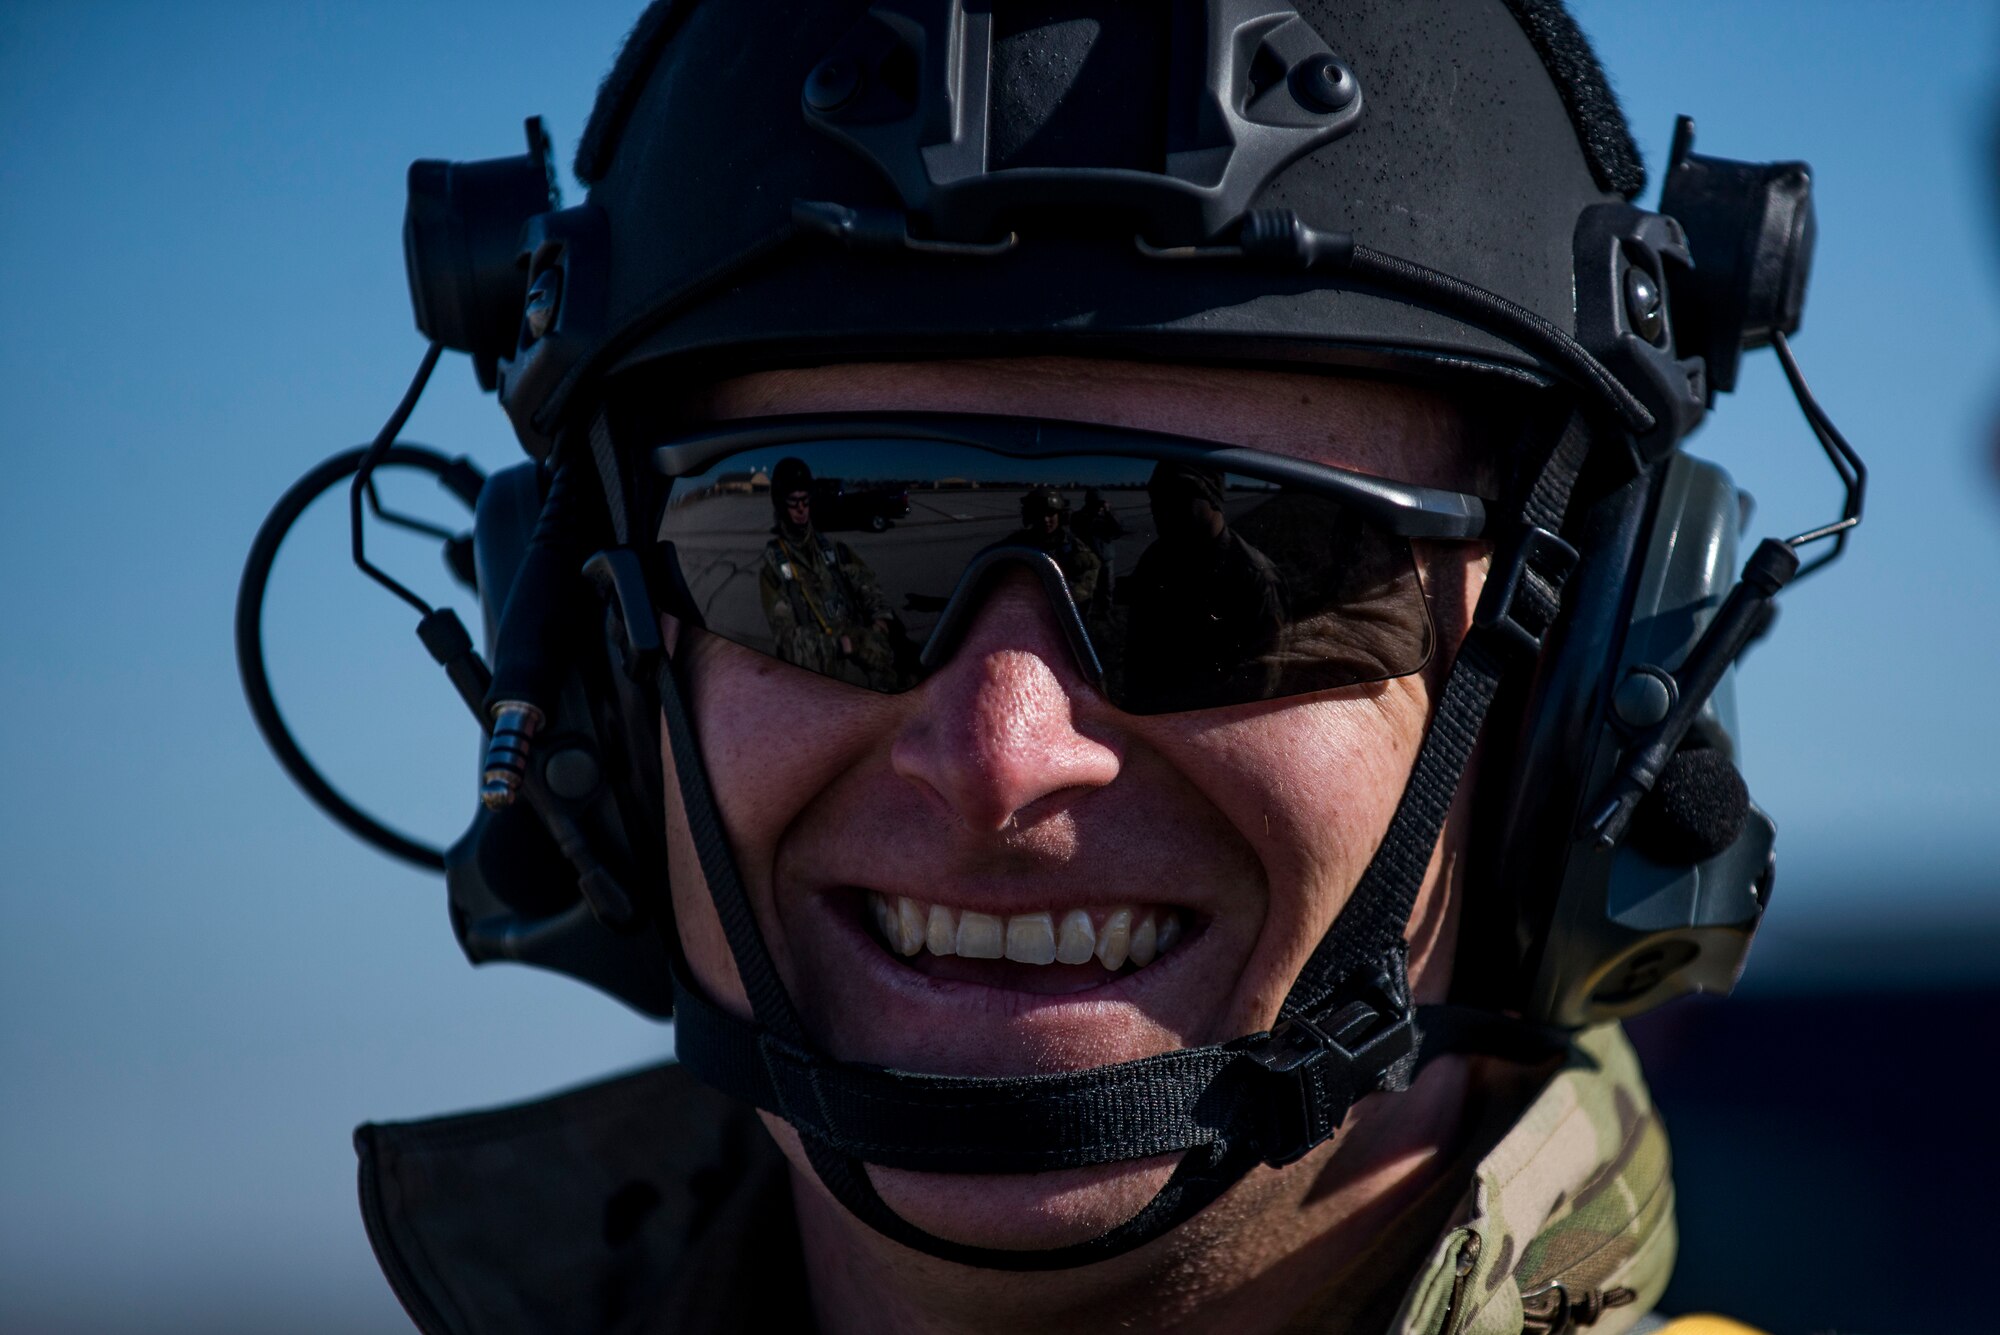 Tech. Sgt. Kyle Oler, 375th Operations Support Squadron's Survival, Evasion, Resistance, and Escape non commissioned officer in charge, prepares for a static jump on March 2, 2017 at Scott AFB, Illinois. Scott AFB hosted this jump to streamline its capabilities and jump program while offering jumpers an opportunity to get required jumps accomplished as they face weather challenges elsewhere. The 375th OSS created the drop zone to increase the readiness of units in and around Scott AFB and for use by flying or ground units with an interest and the requirements. (U.S. Air Force photos/Senior Airman Tristin English)